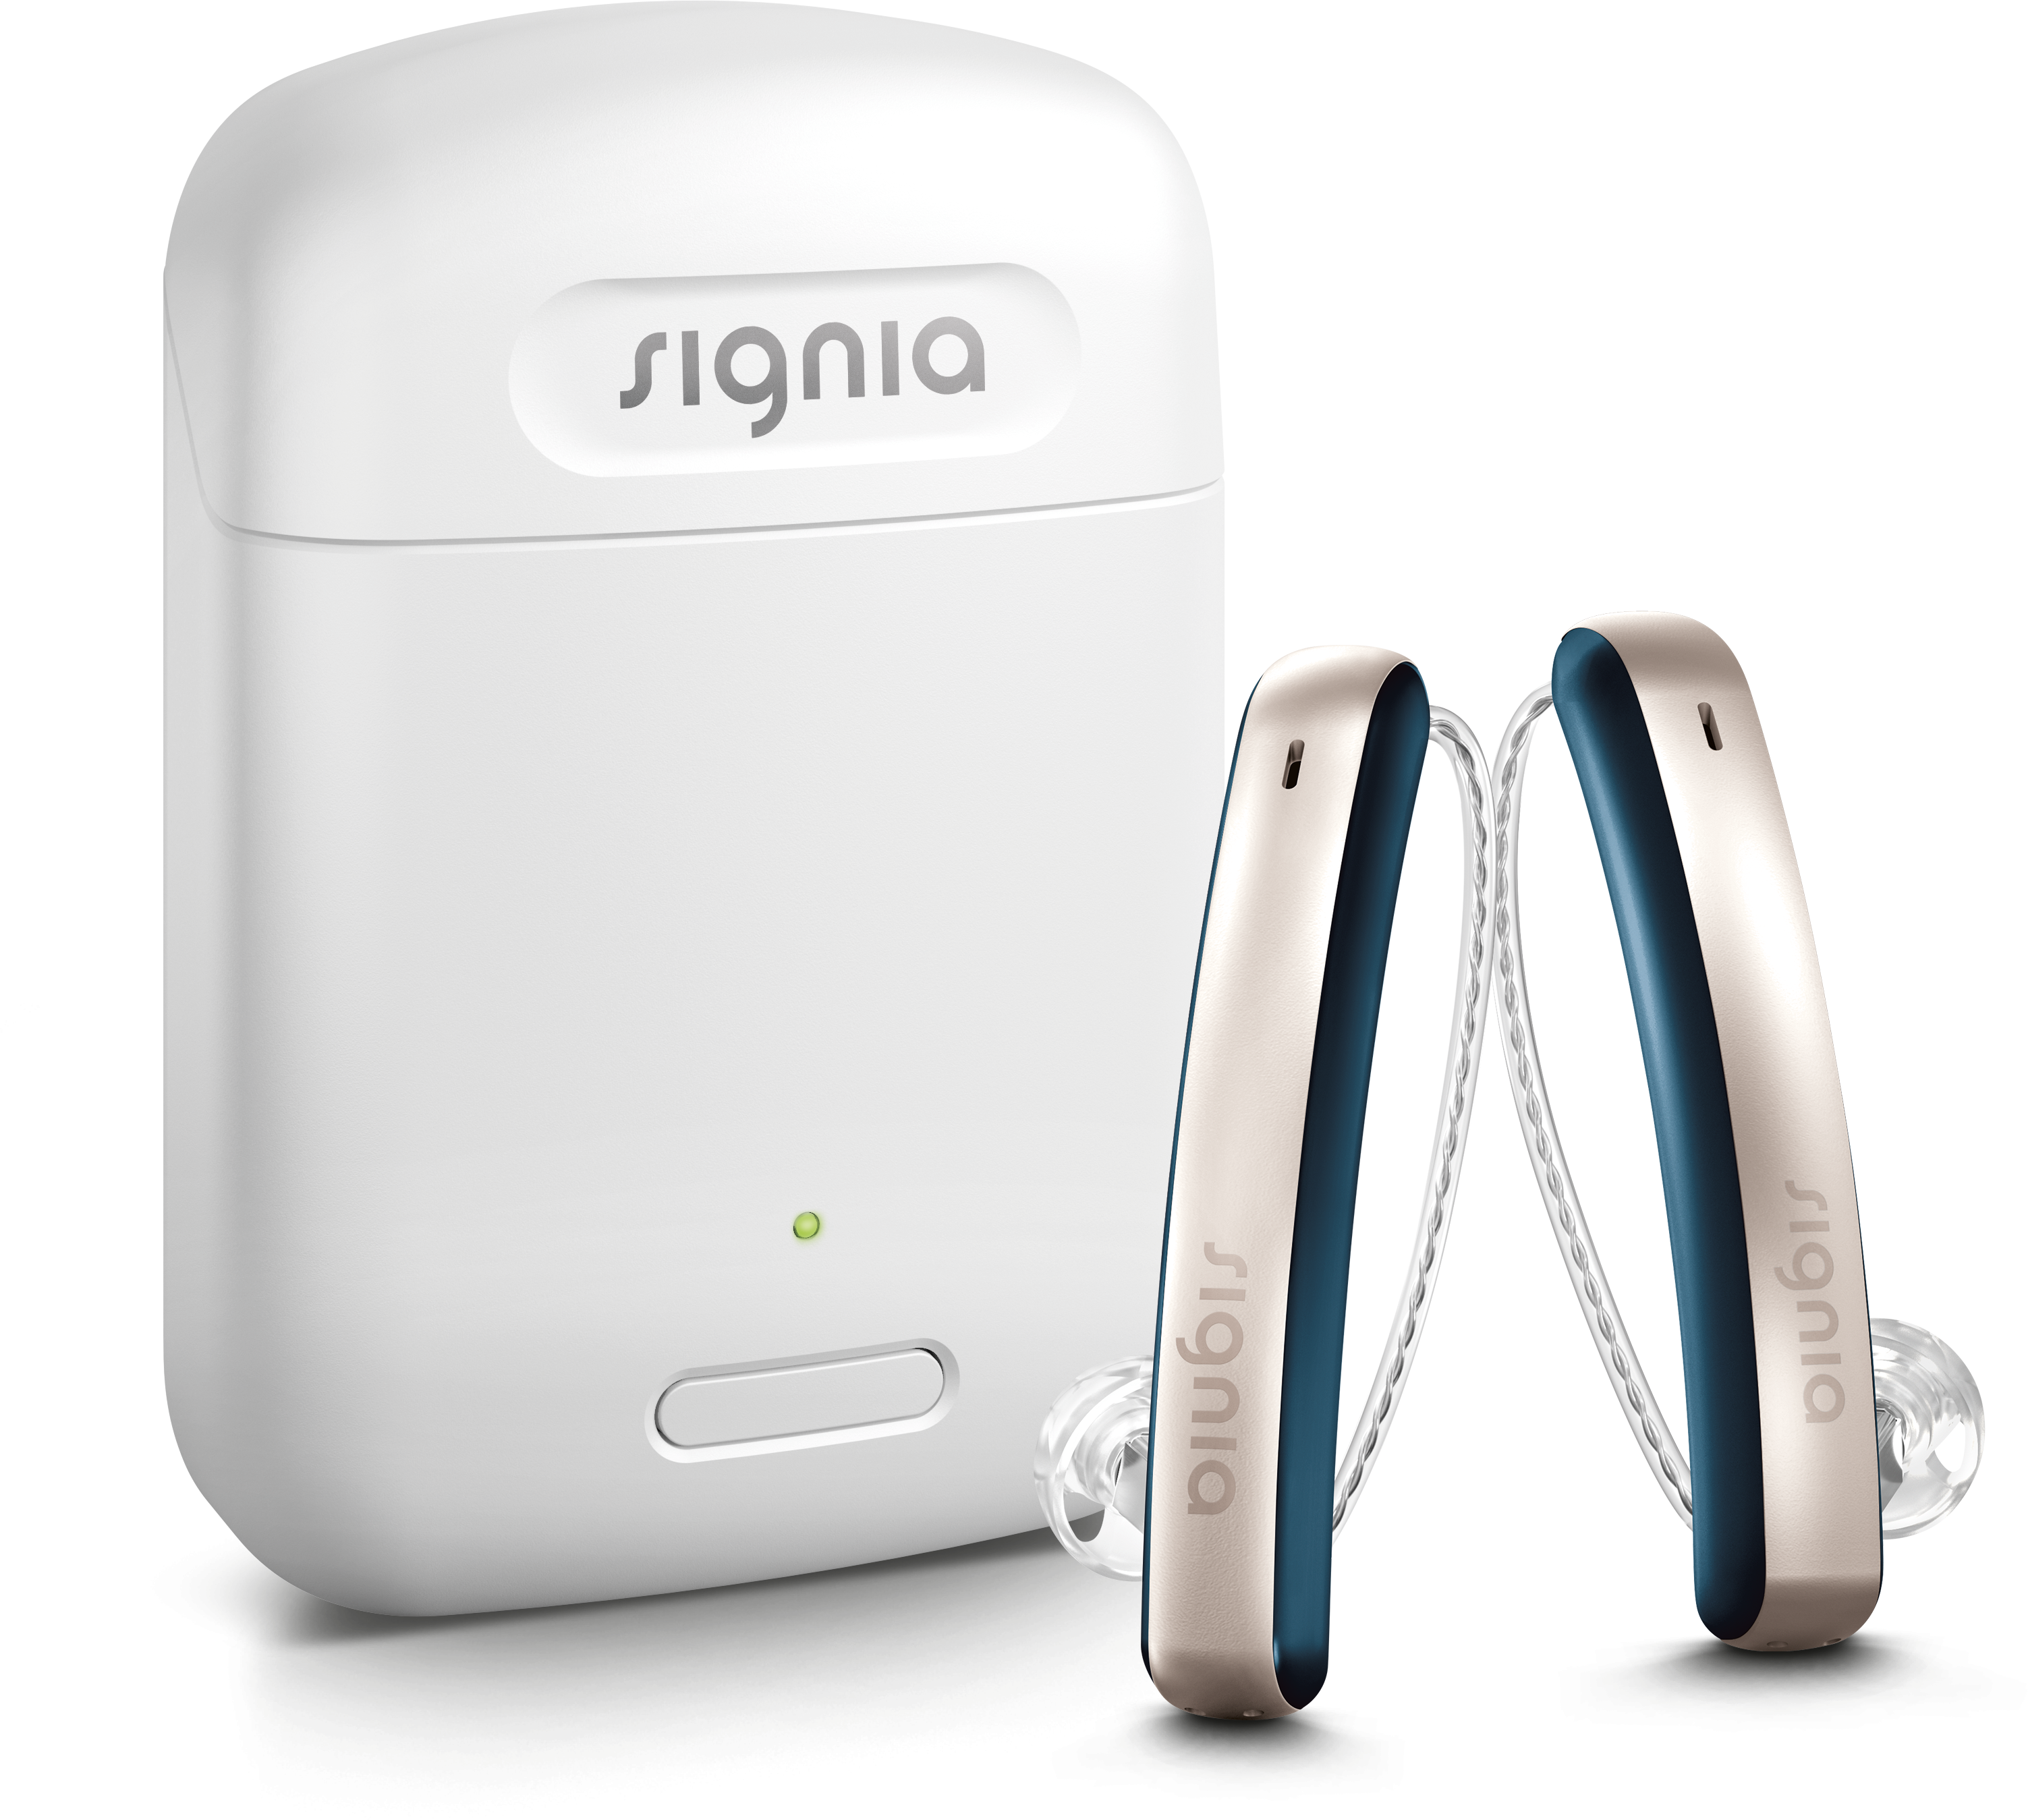 Wearers of the Styletto Connect hearing aids from Signia can express their individual style by choosing one of three elegant color combinations